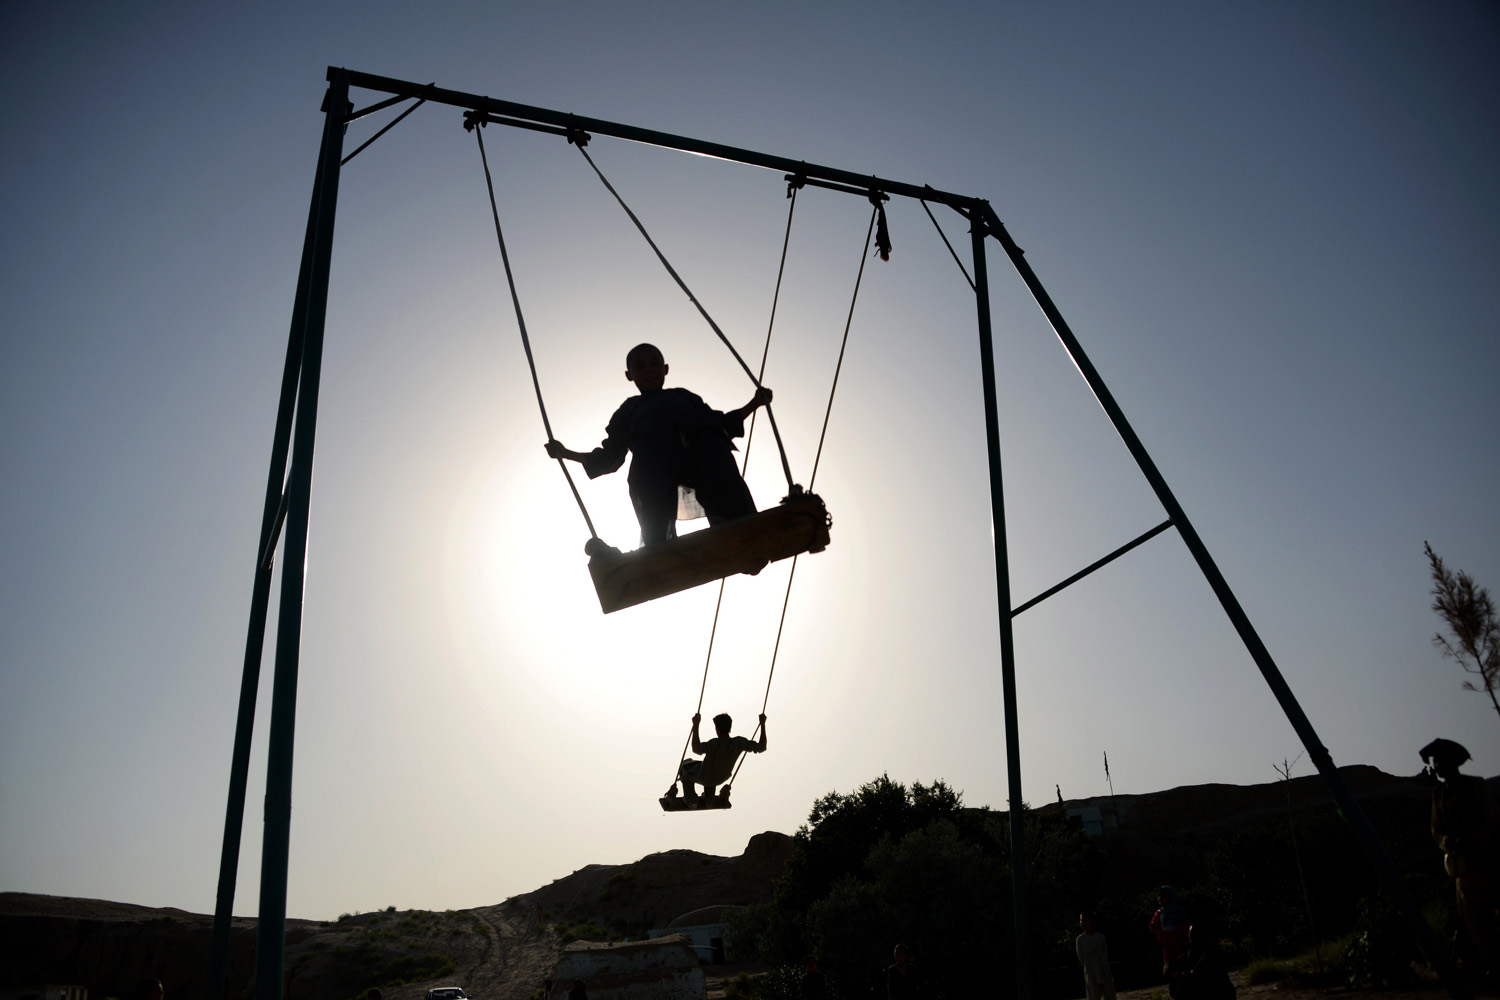 Afghan youth play on swings on the outskirts of Mazar-i-sharif on May 13, 2014.